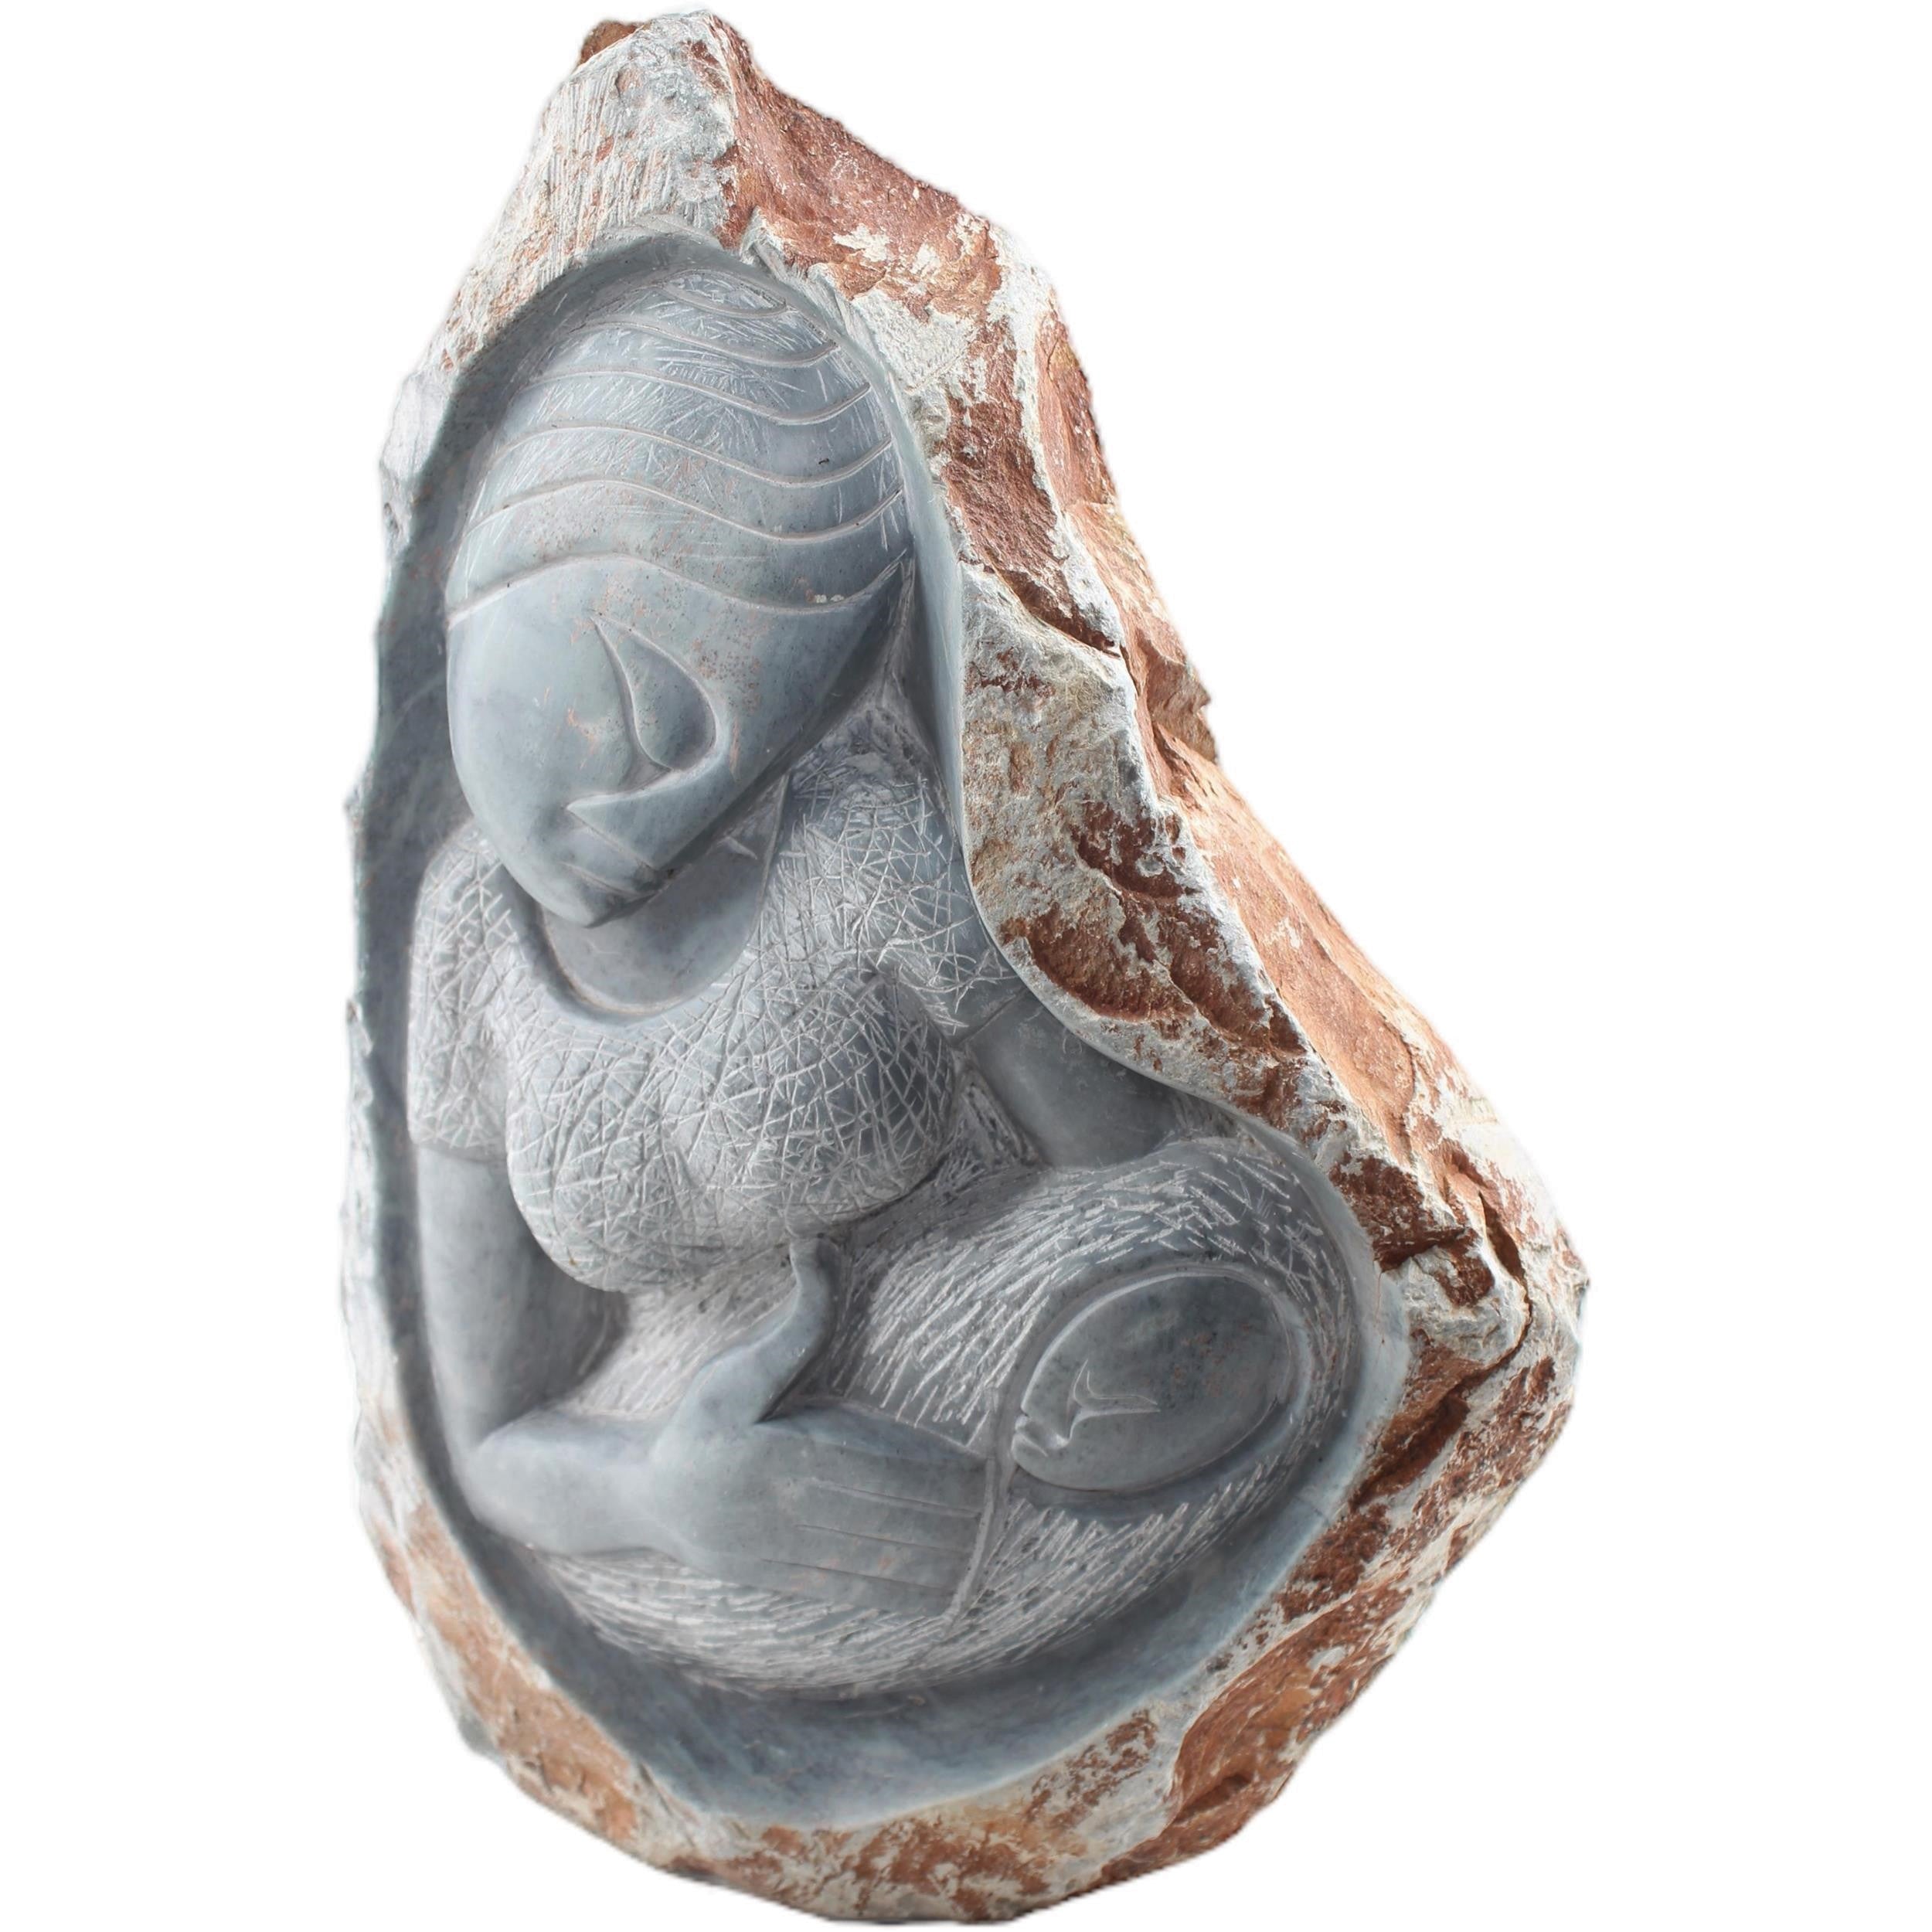 Shona Tribe Serpentine Stone Mother and Child ~16.9" Tall - Mother and Child